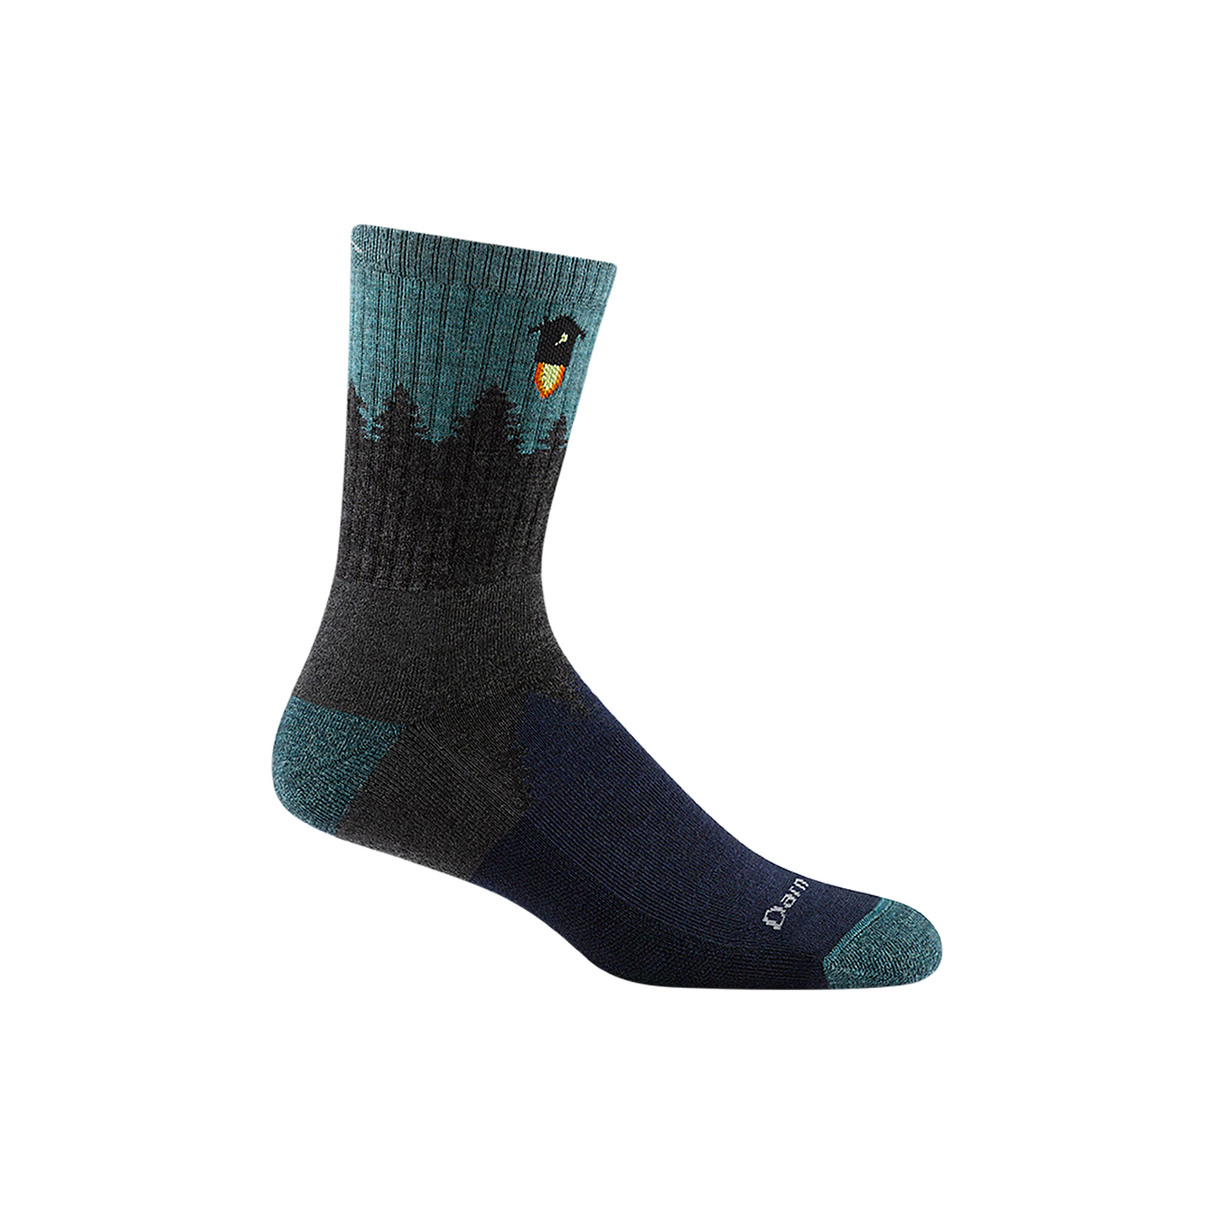 Darn Tough Number 2 Midweight Micro Crew Sock with Cushion (Men) - Gray Socks - Perf - Micro - The Heel Shoe Fitters